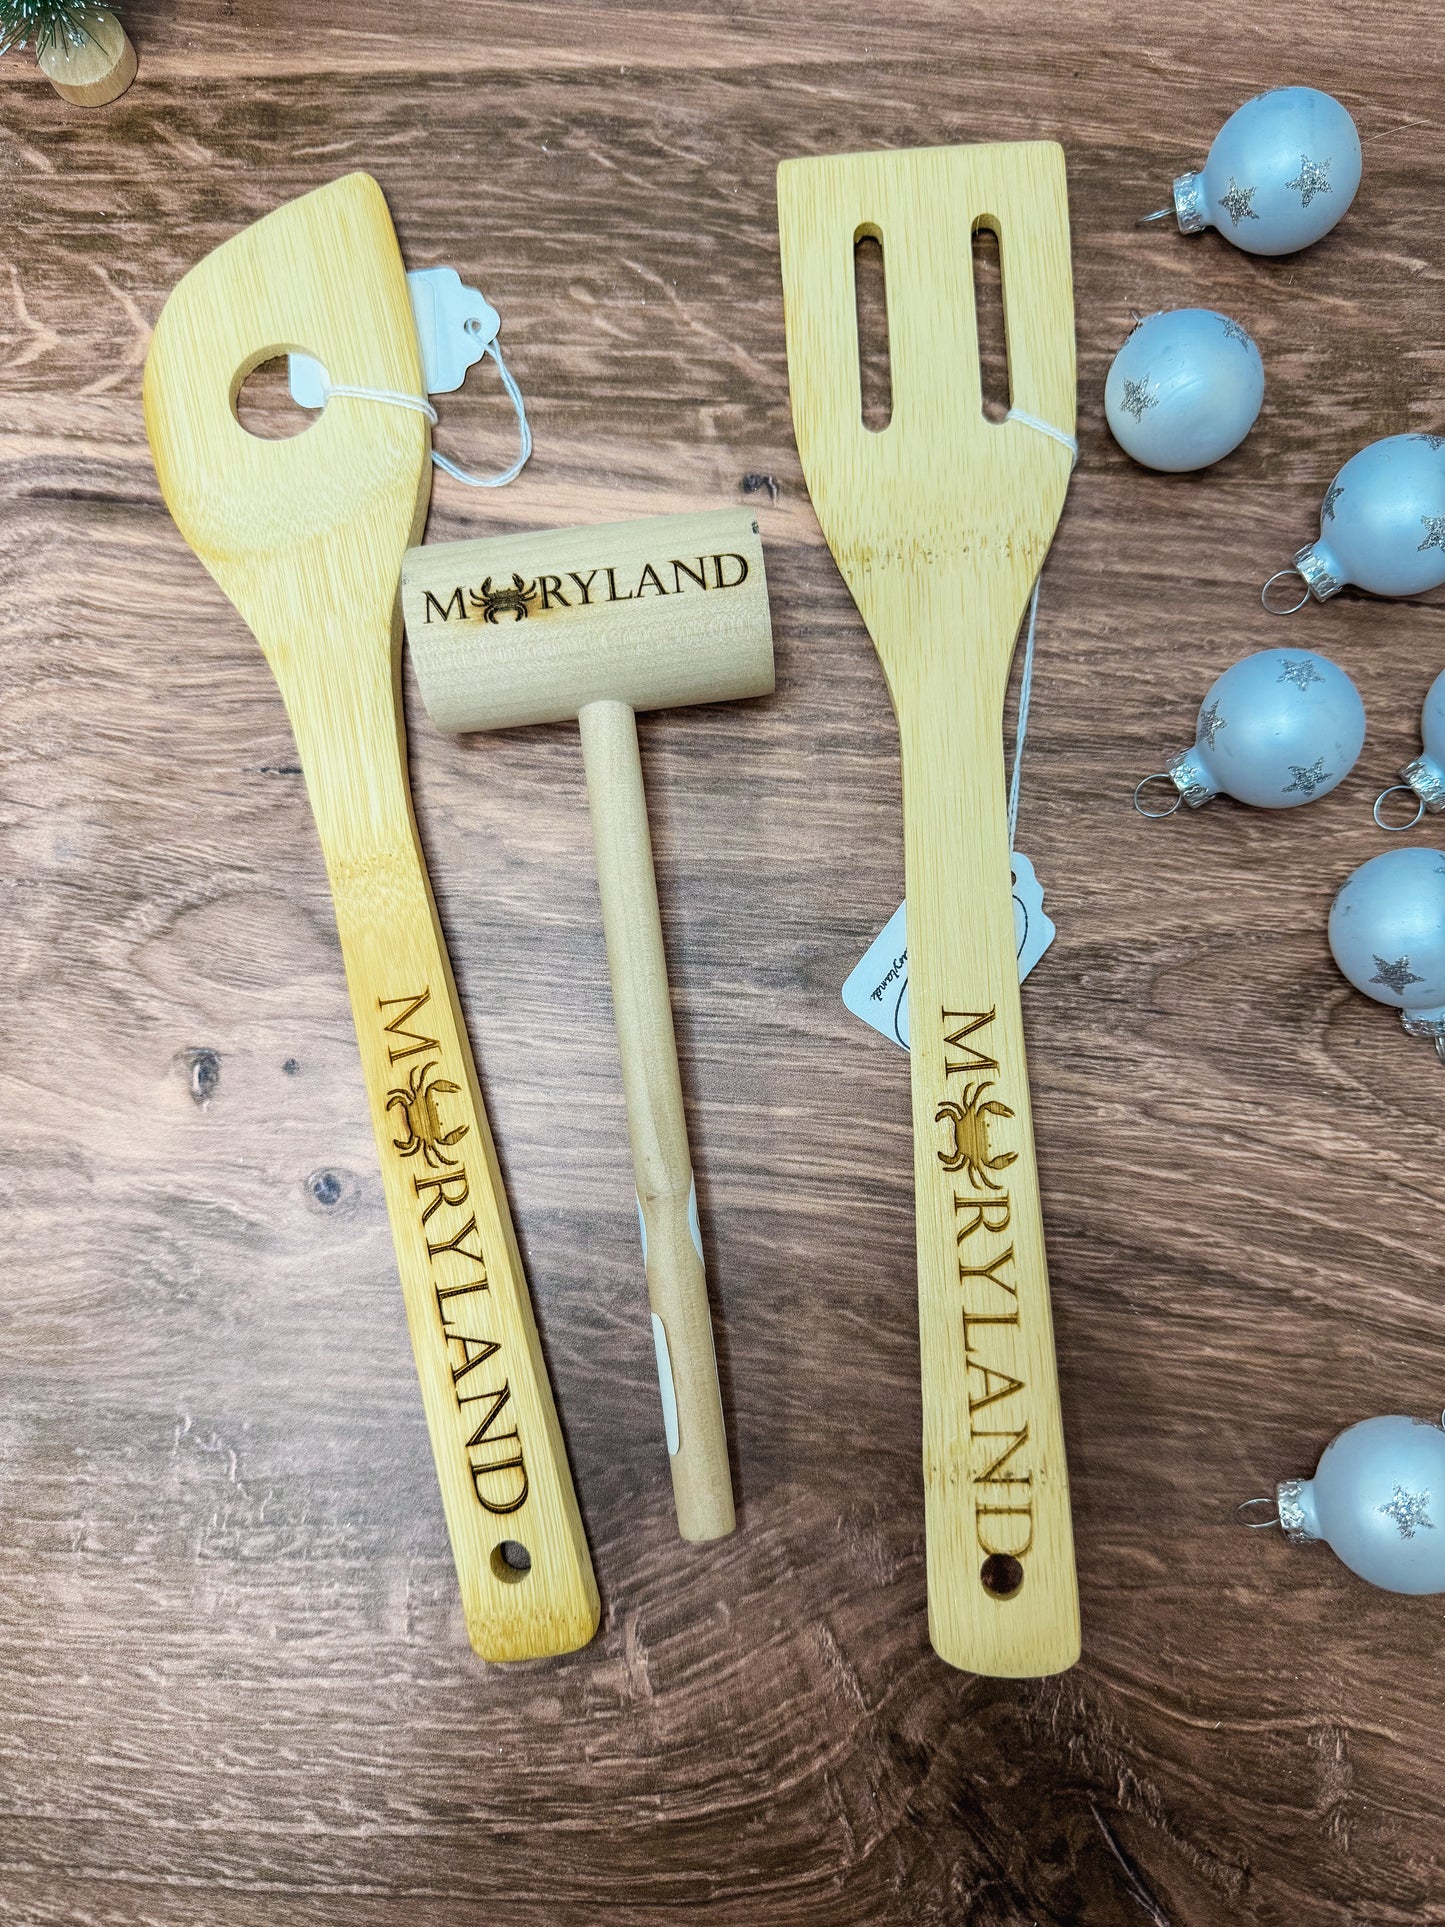 Engraved kitchen tools